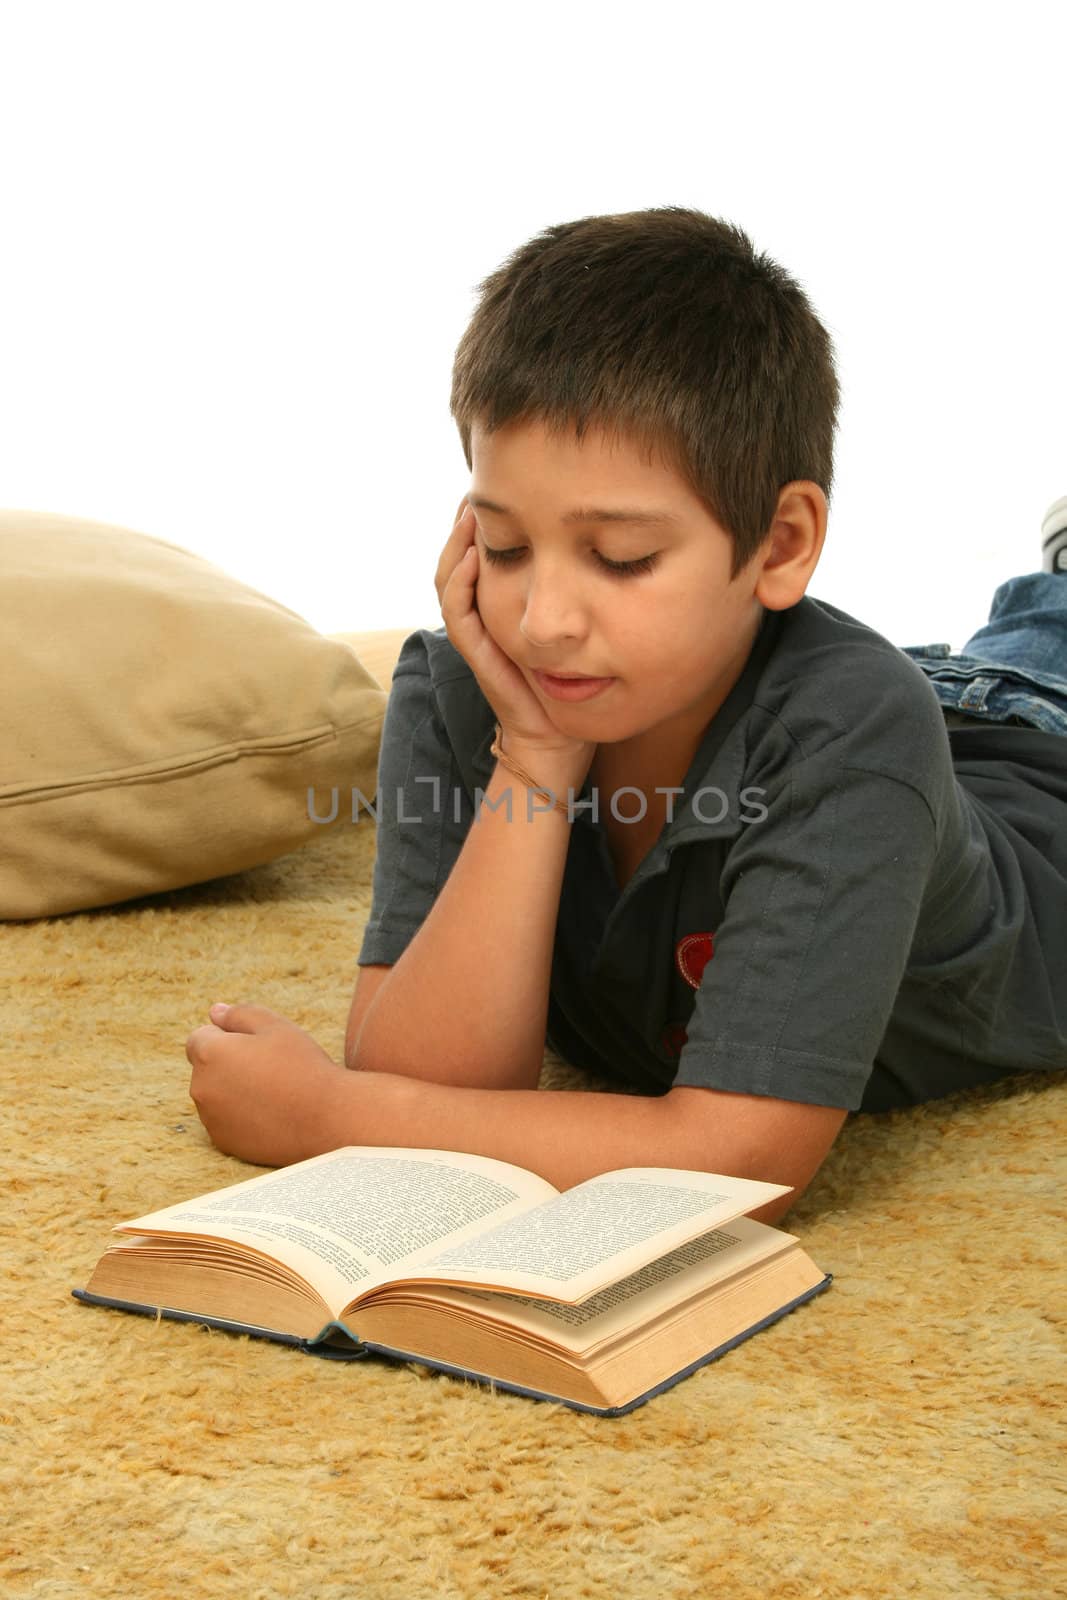 Boy in a room reading a book over a carpet. 